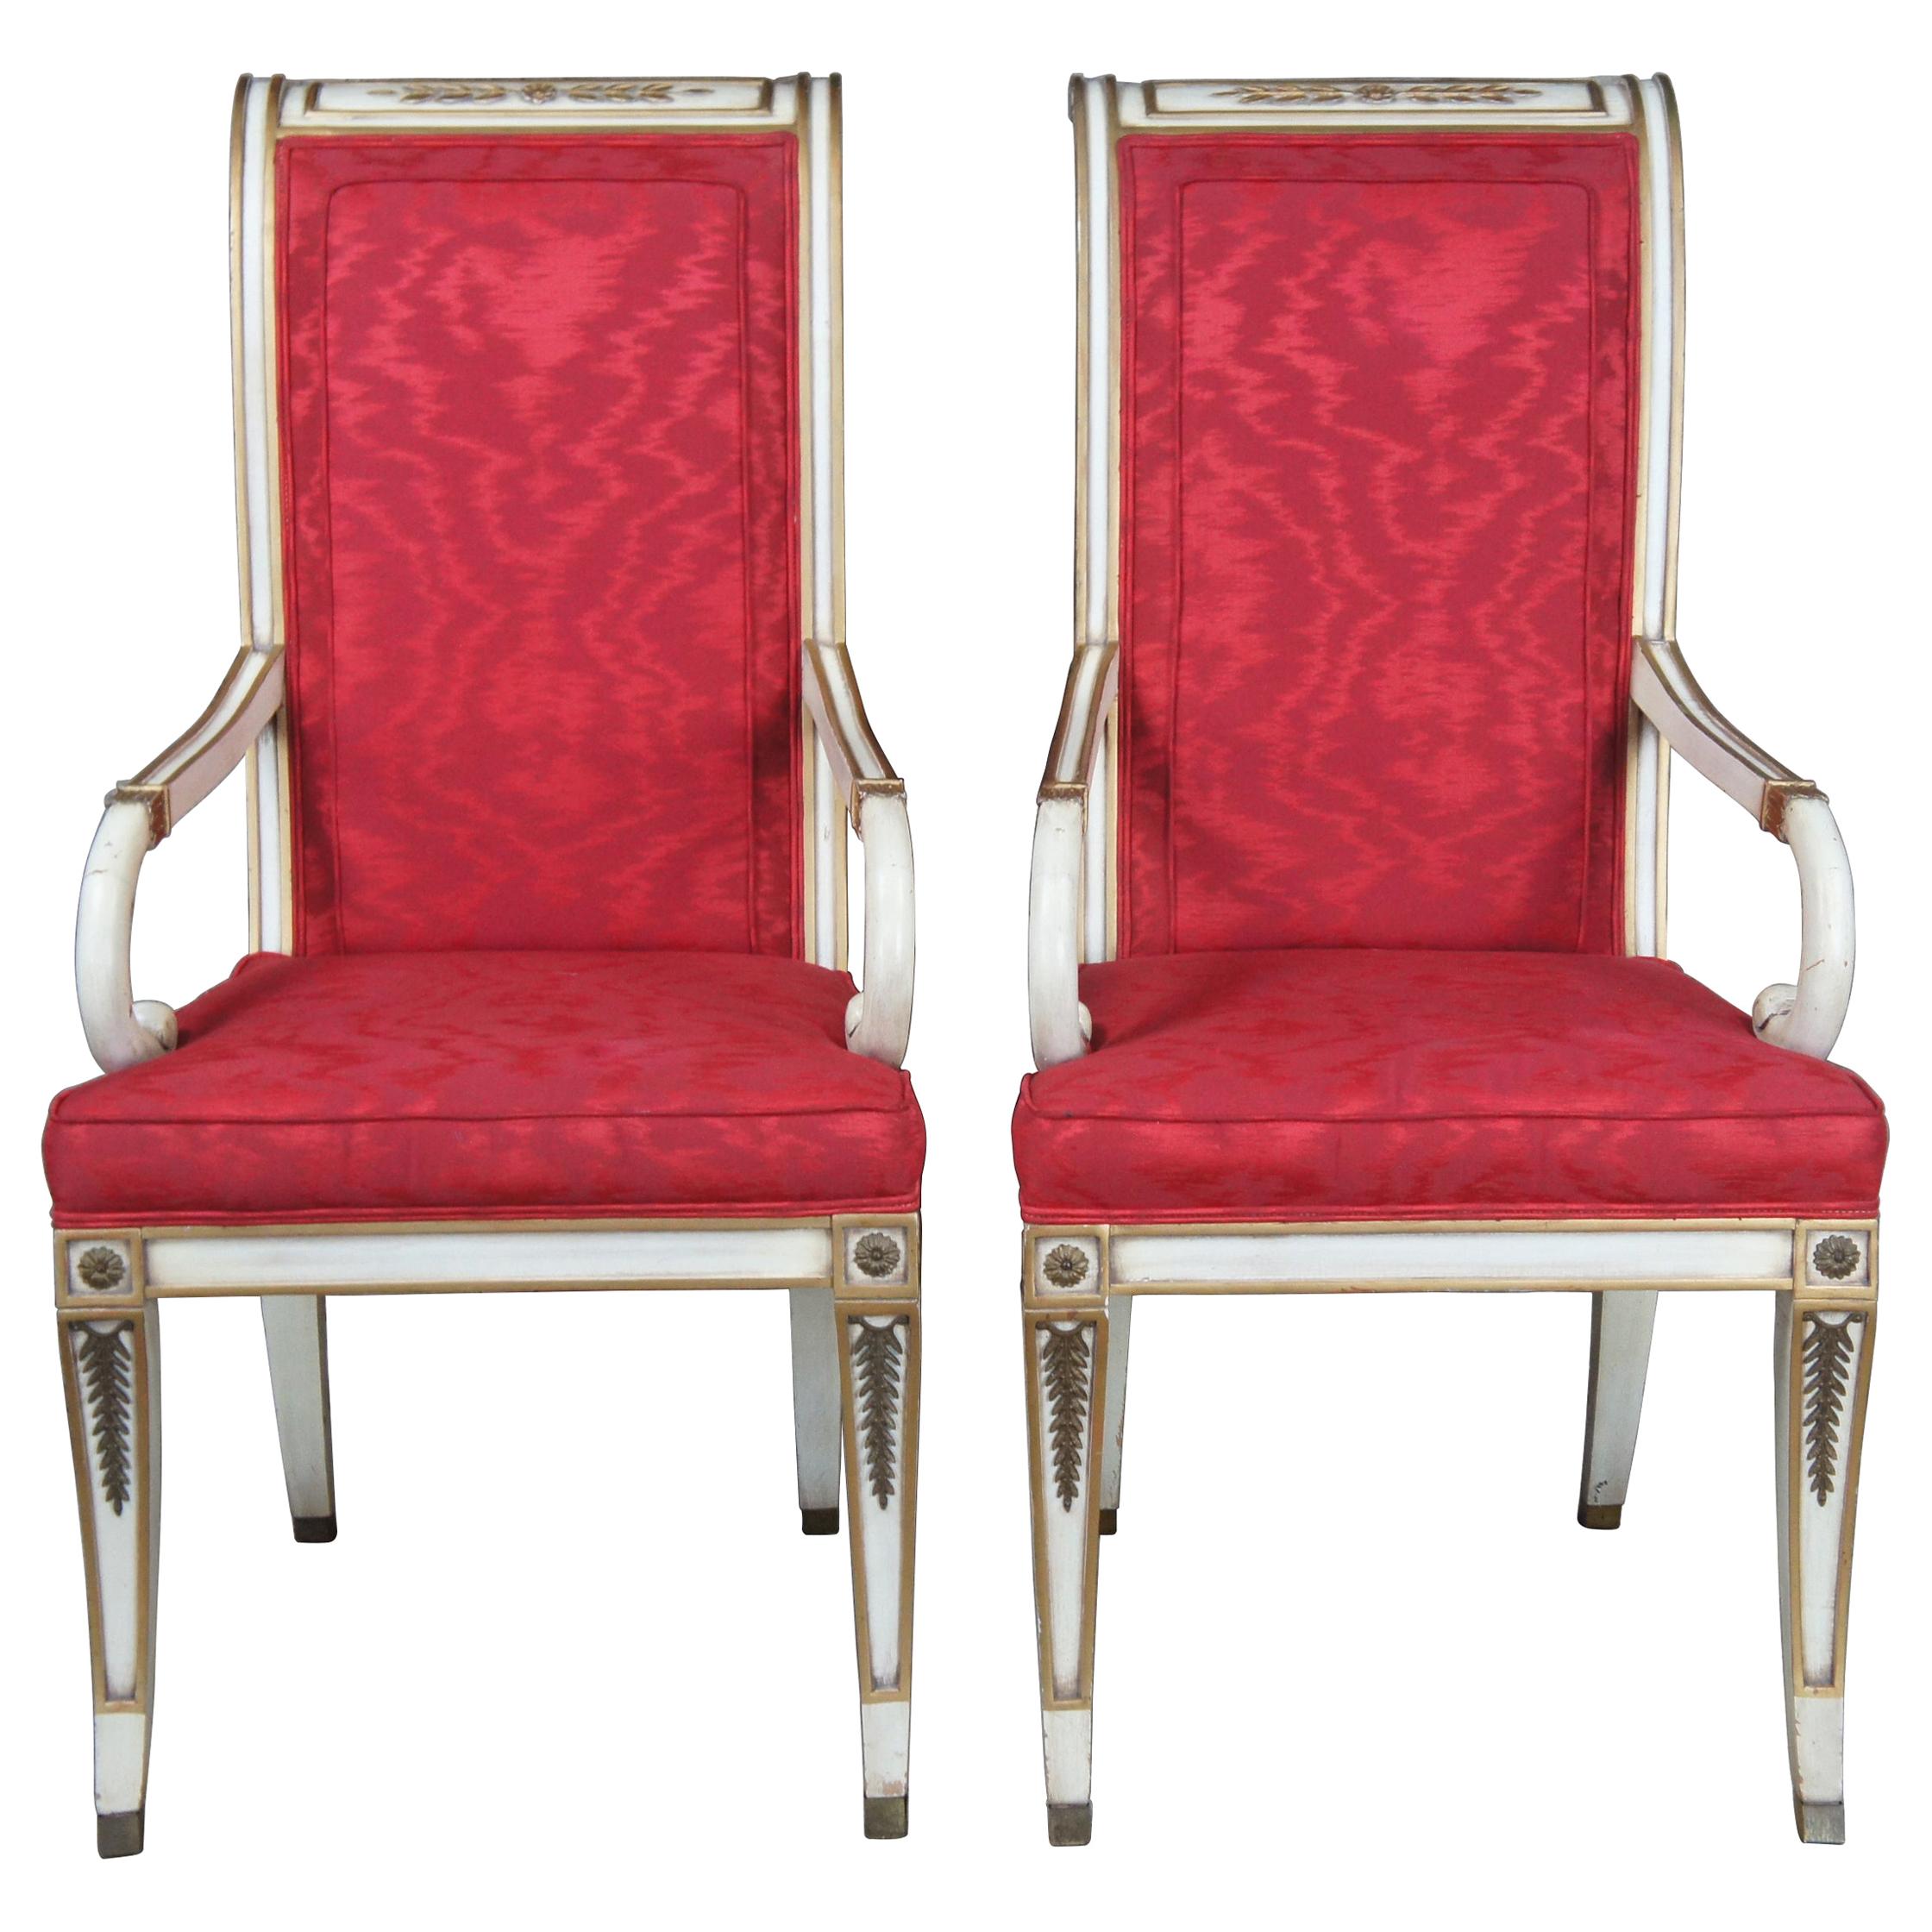 Two vintage Karges French Empire dining arm or accent chairs. Painted white with gold carved accents, scrolled arms, brass plates, saber legs and red upholstery.

Karges carefully crafts exquisite masterpieces in their Grand Rapids, Michigan